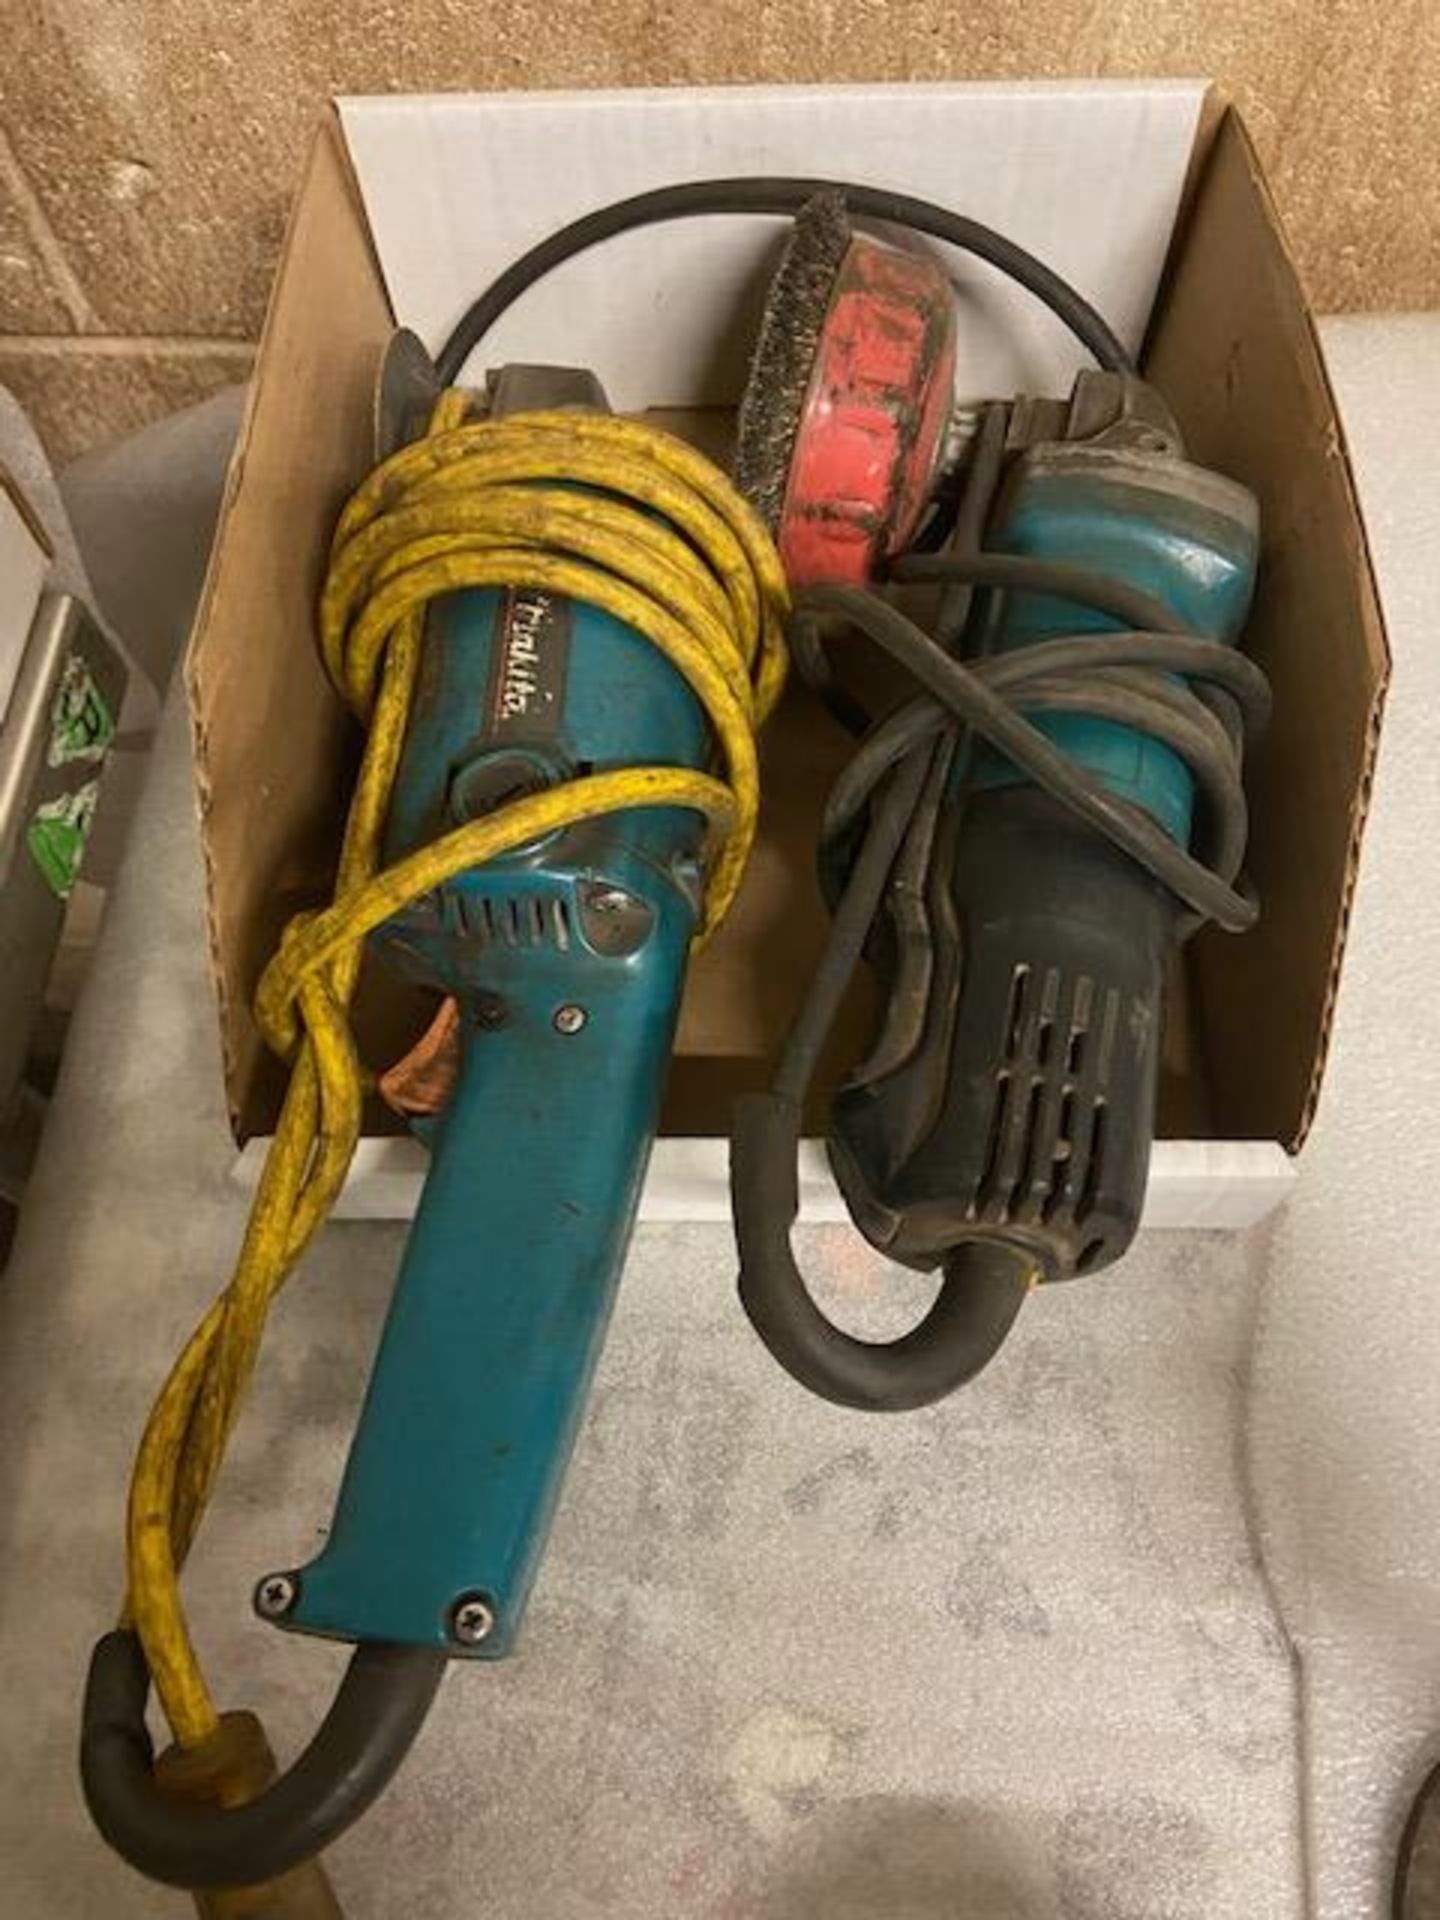 Lot of 2 Makita Electric Angle Grinder Power Tool Units